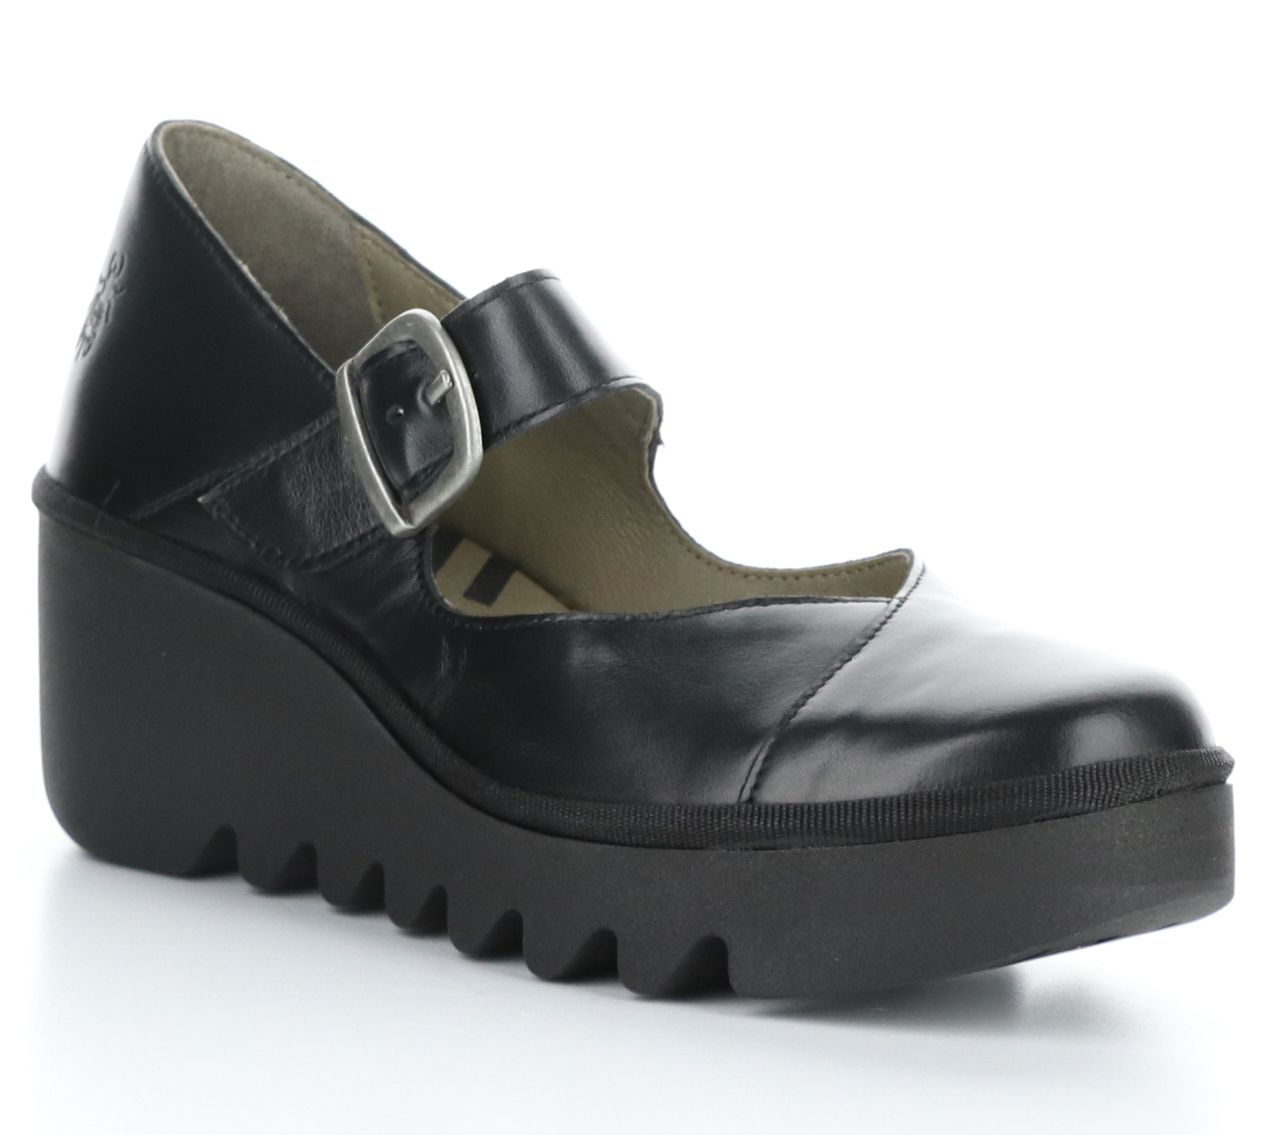 Fly London Leather Mary Janes Wedge - Baxe - QVC.com